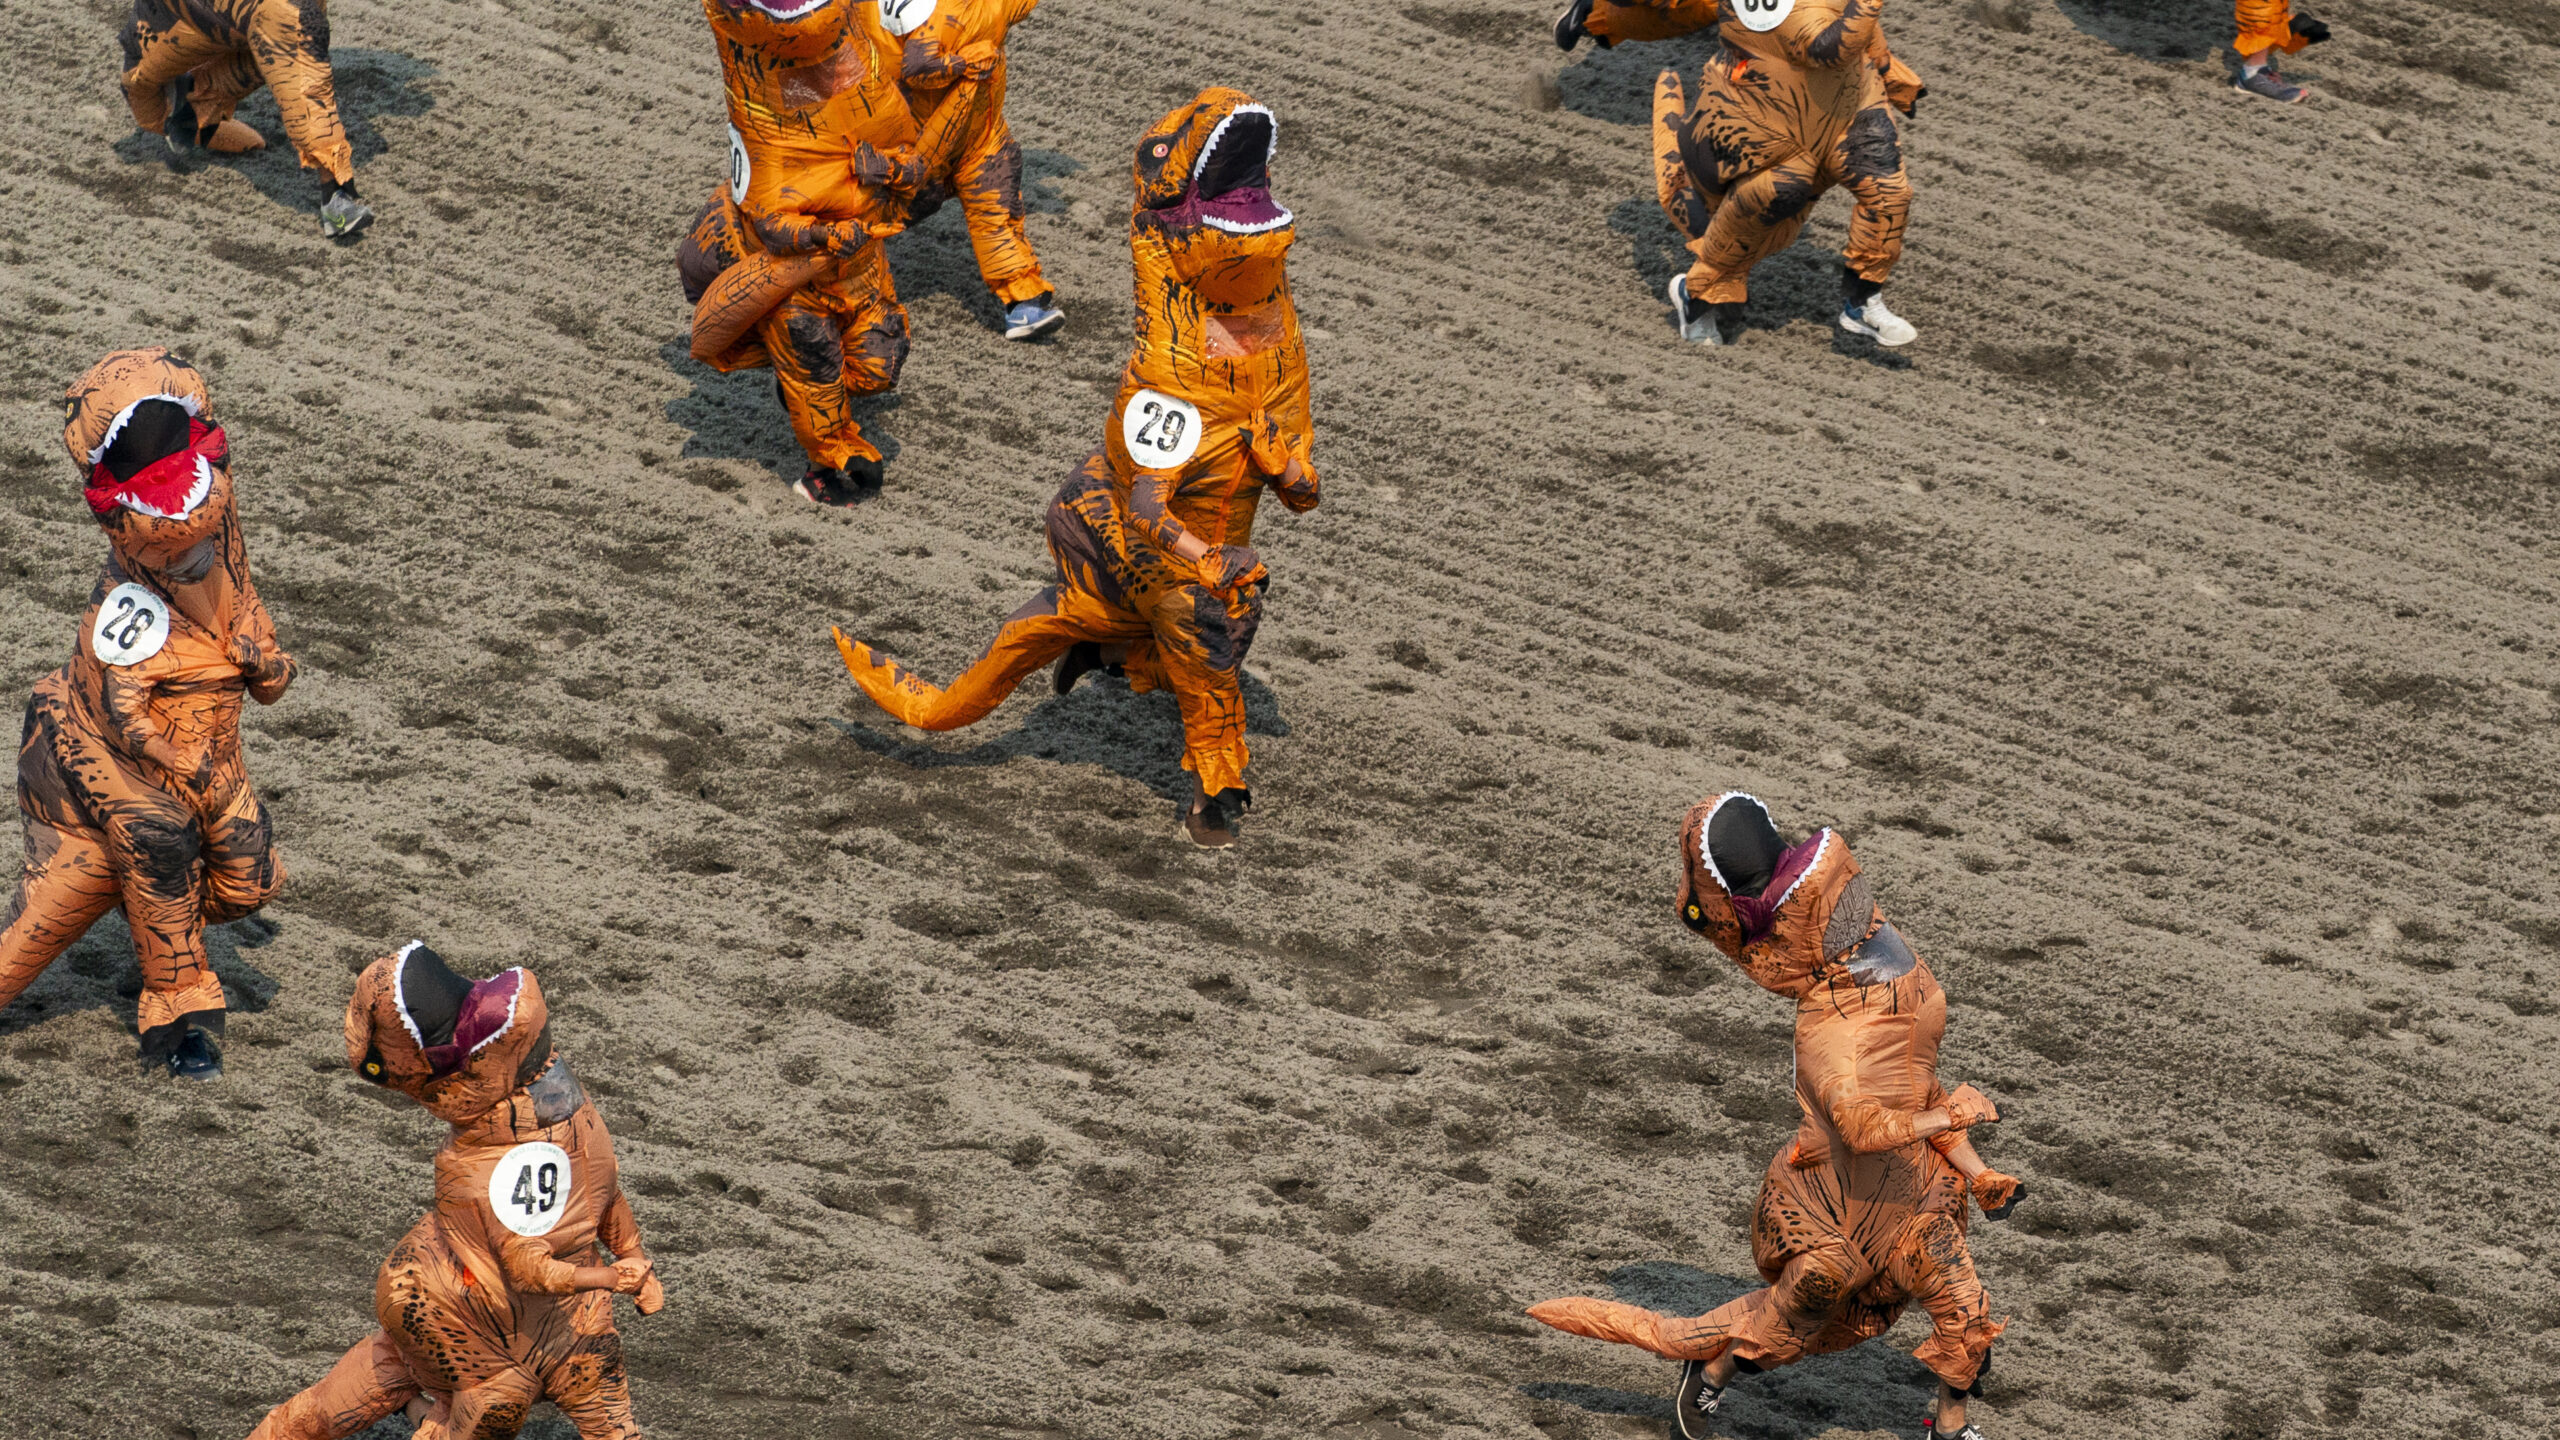 People in inflatable Tyrannosaurus rex costumes run on a dirt track. A track for live horse racing ...